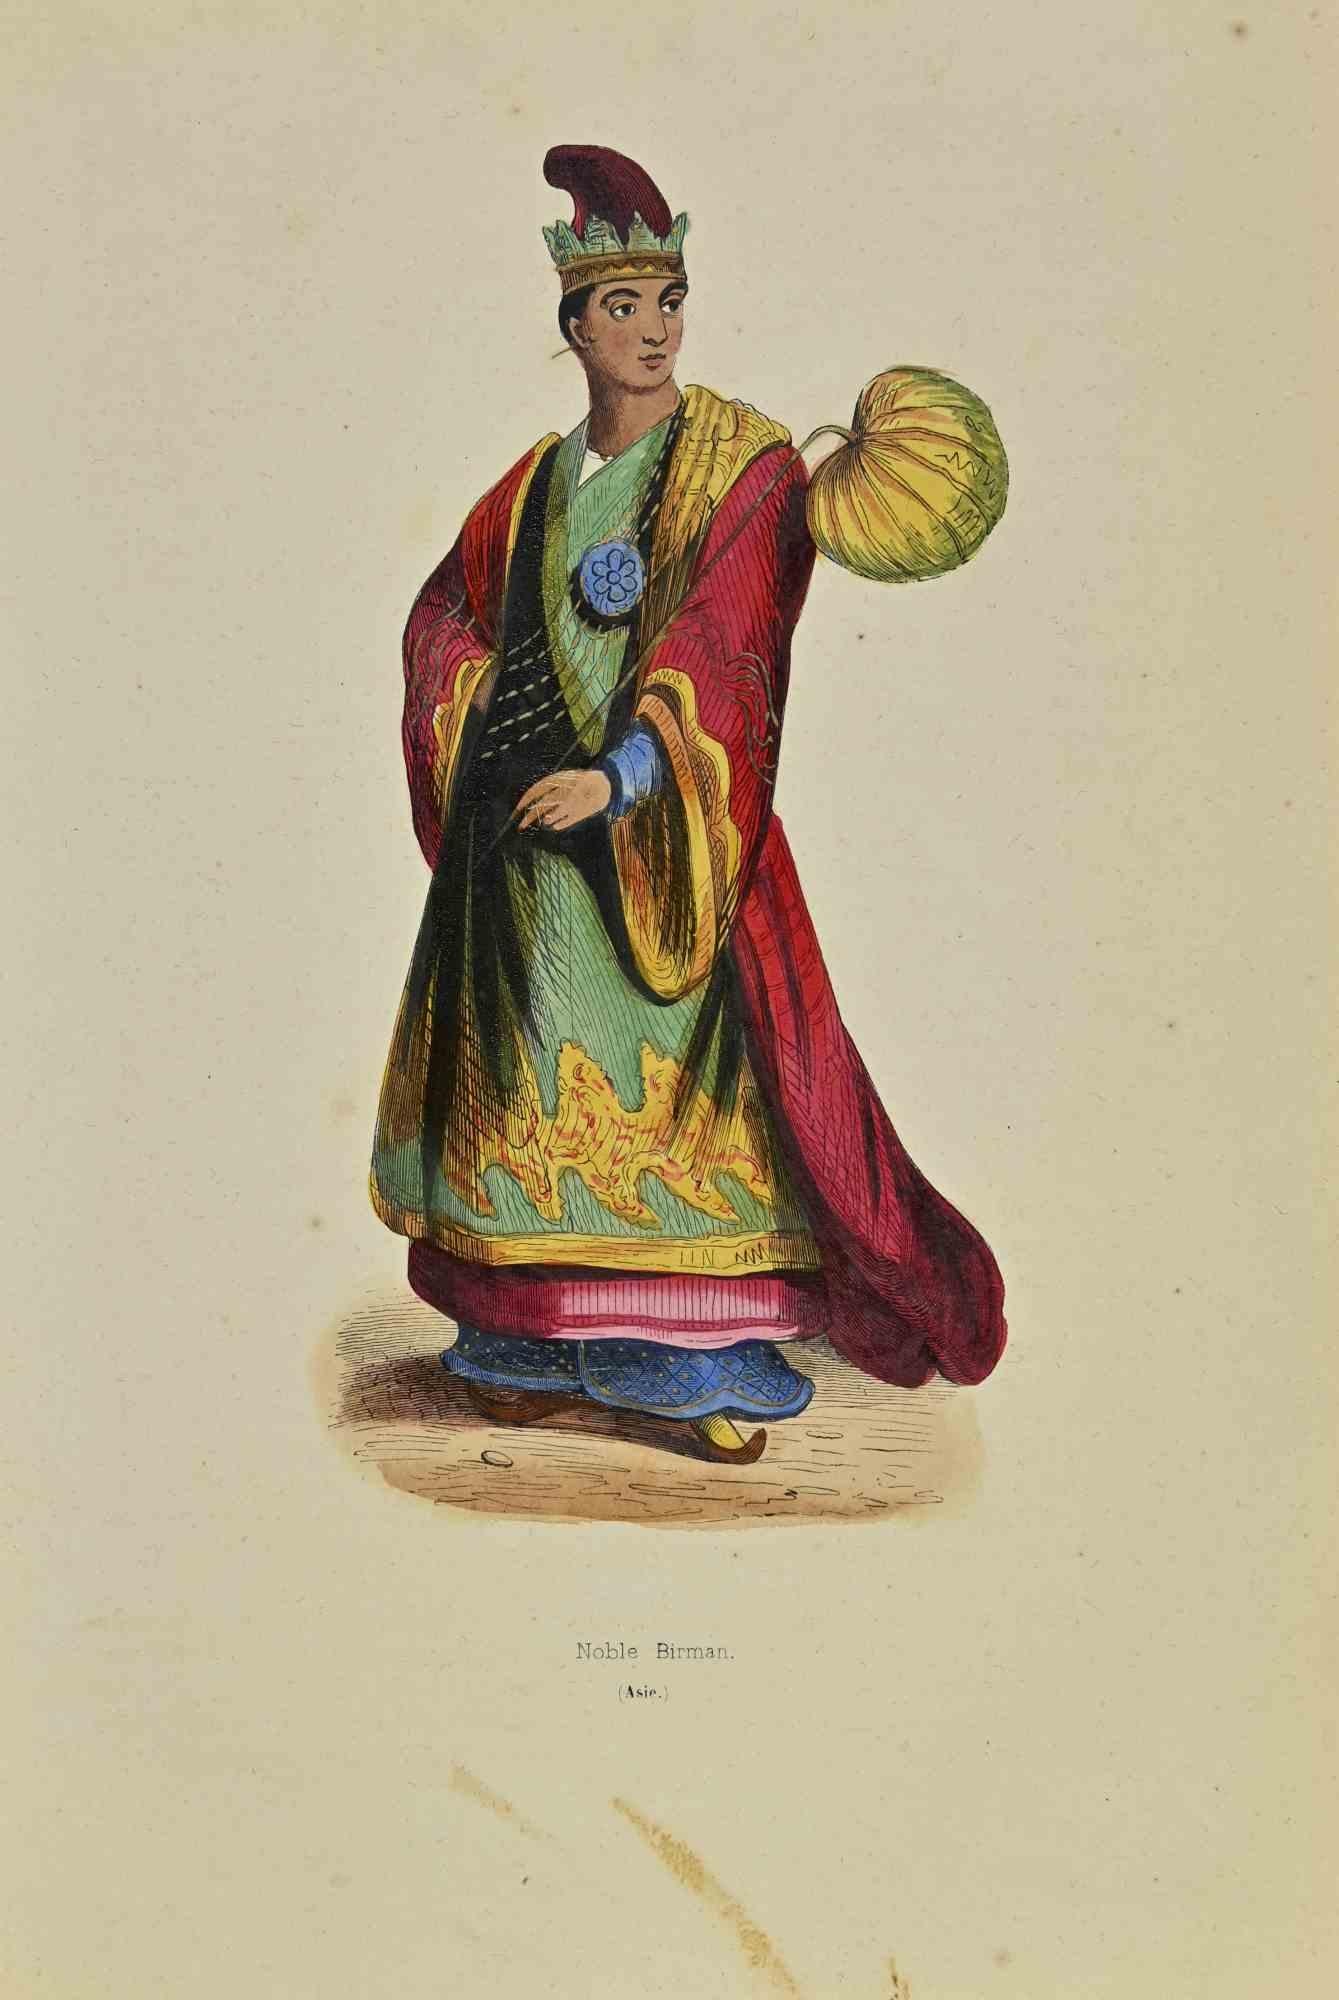 Burmese Nobleman is a lithograph made by Auguste Wahlen in 1844.

Hand colored.

Good condition.

At the center of the artwork is the original title "Noble Birman".

The work is part of Suite Moeurs, usages et costumes de tous les peuples du monde,